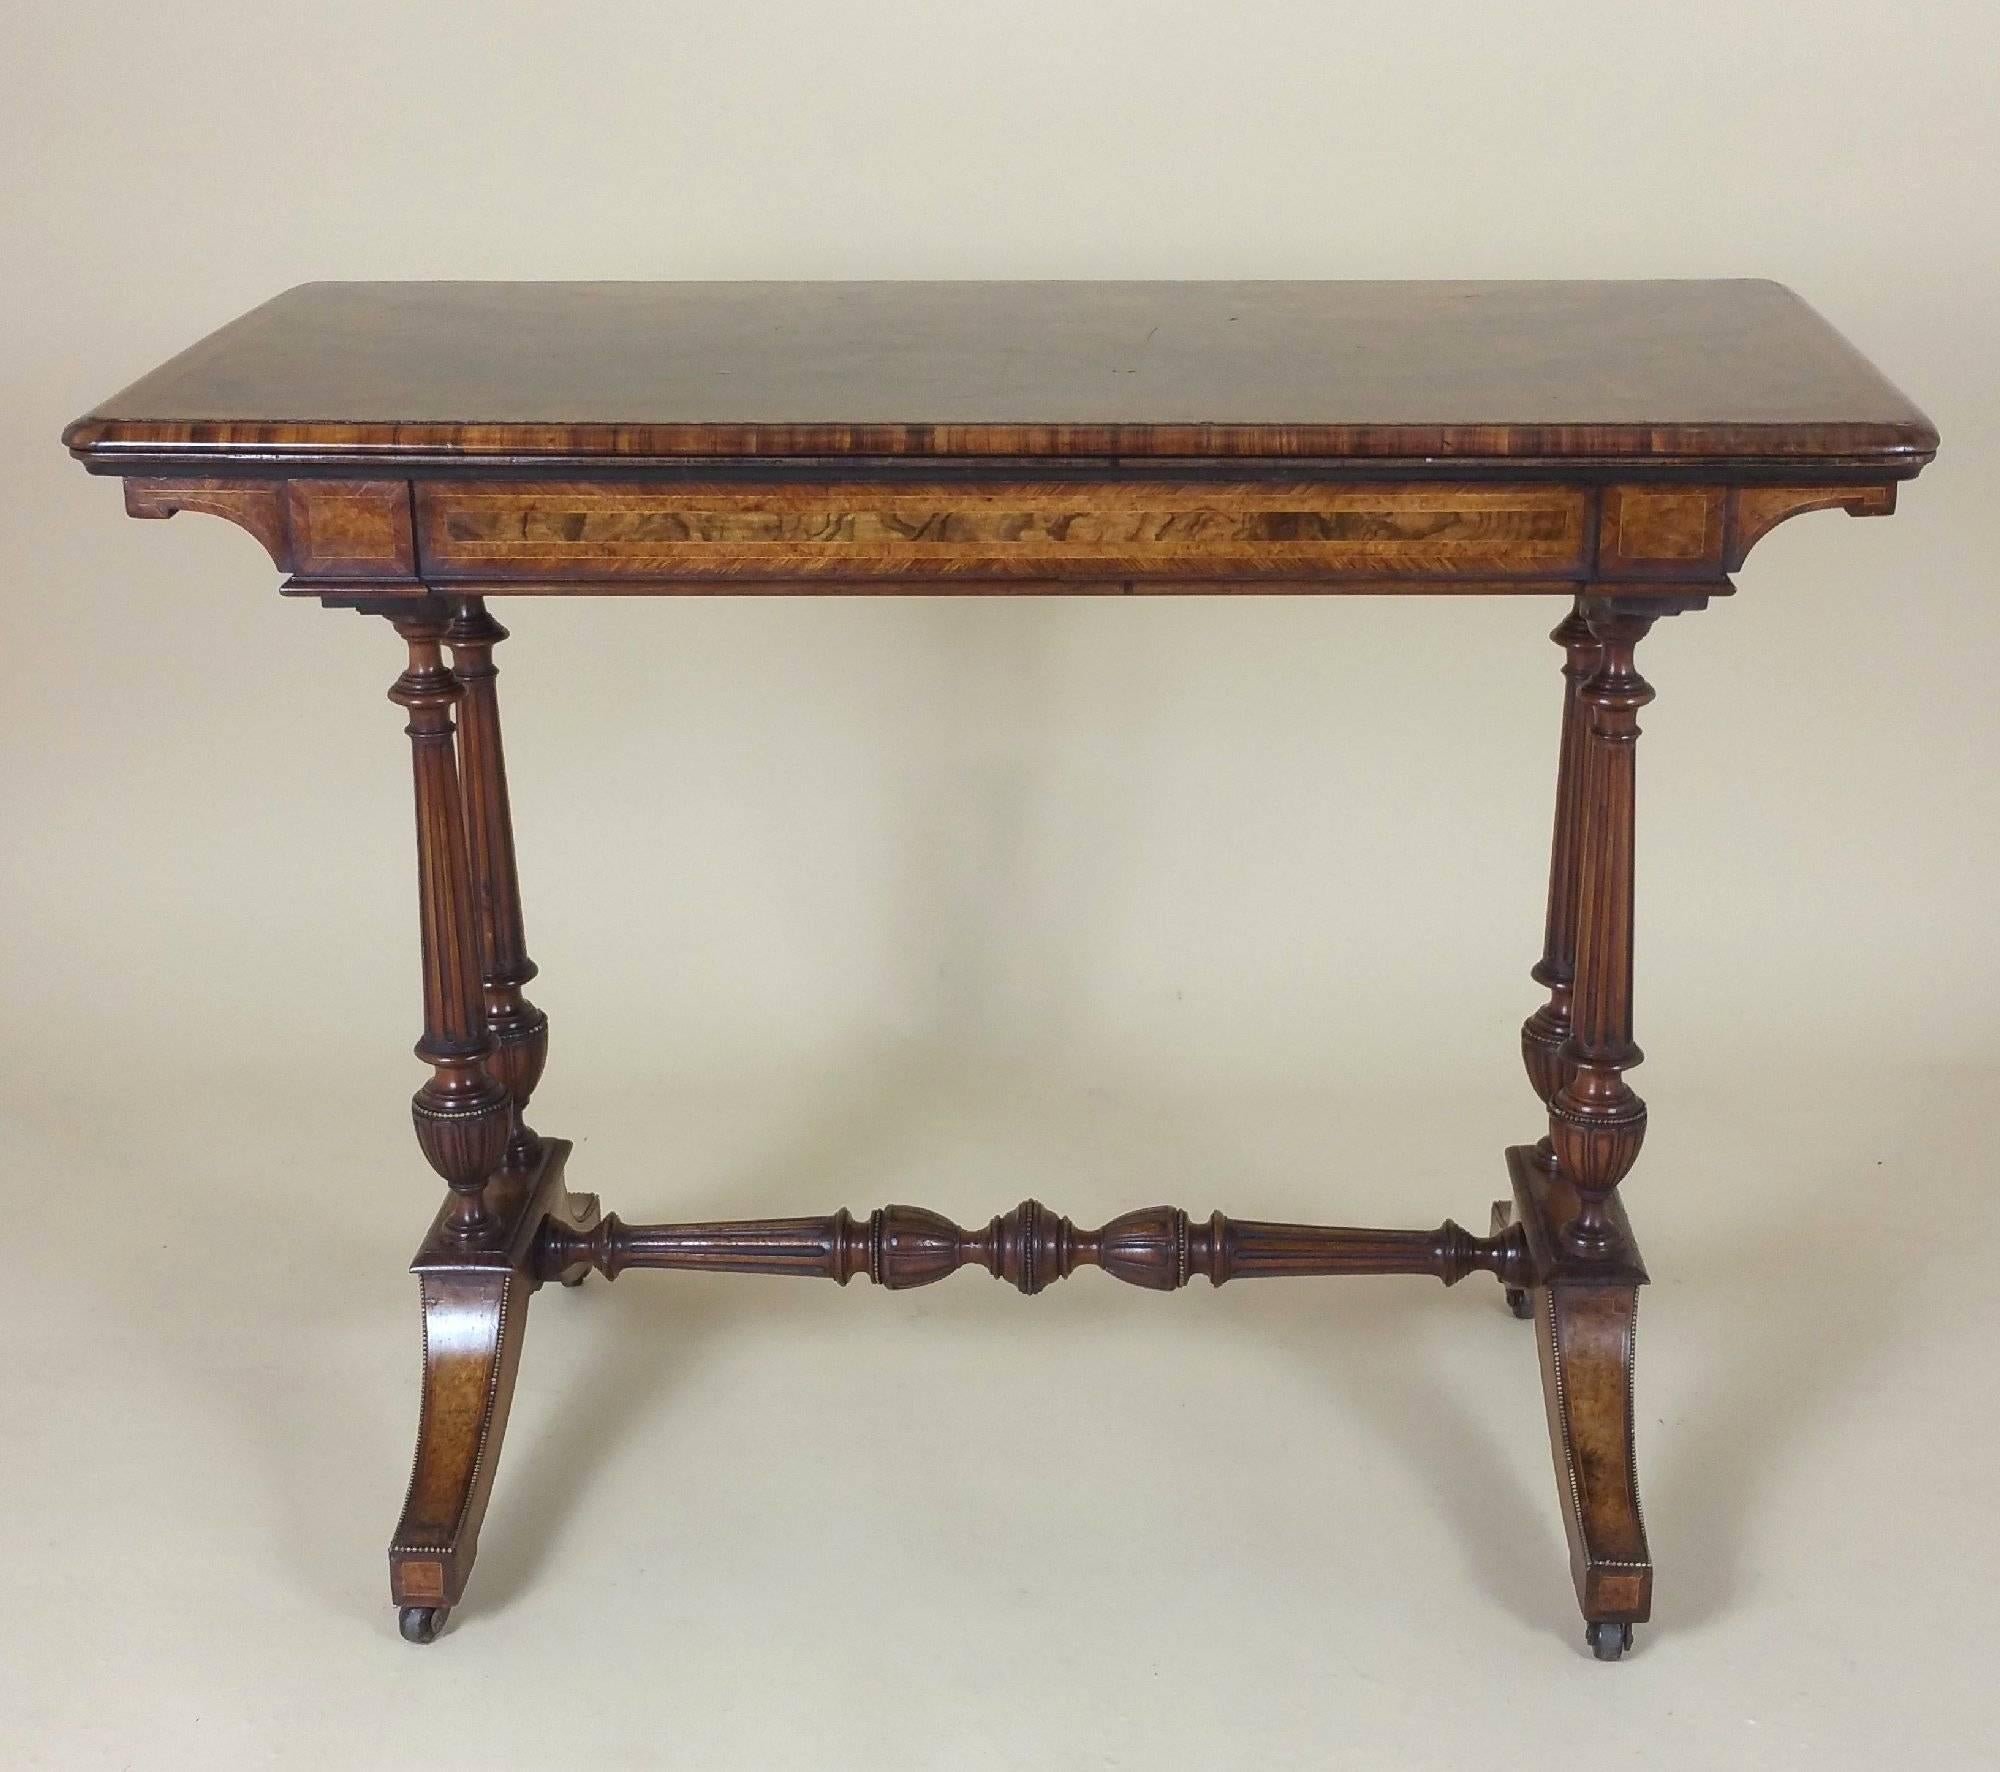 This beautiful 19th C. figured walnut fold over card table is stamped Lamb of Manchester, a well-known and prominent cabinet maker of the period. The card table features a cross banded decoration of Amboyna and brass mounts, with lovely detail work